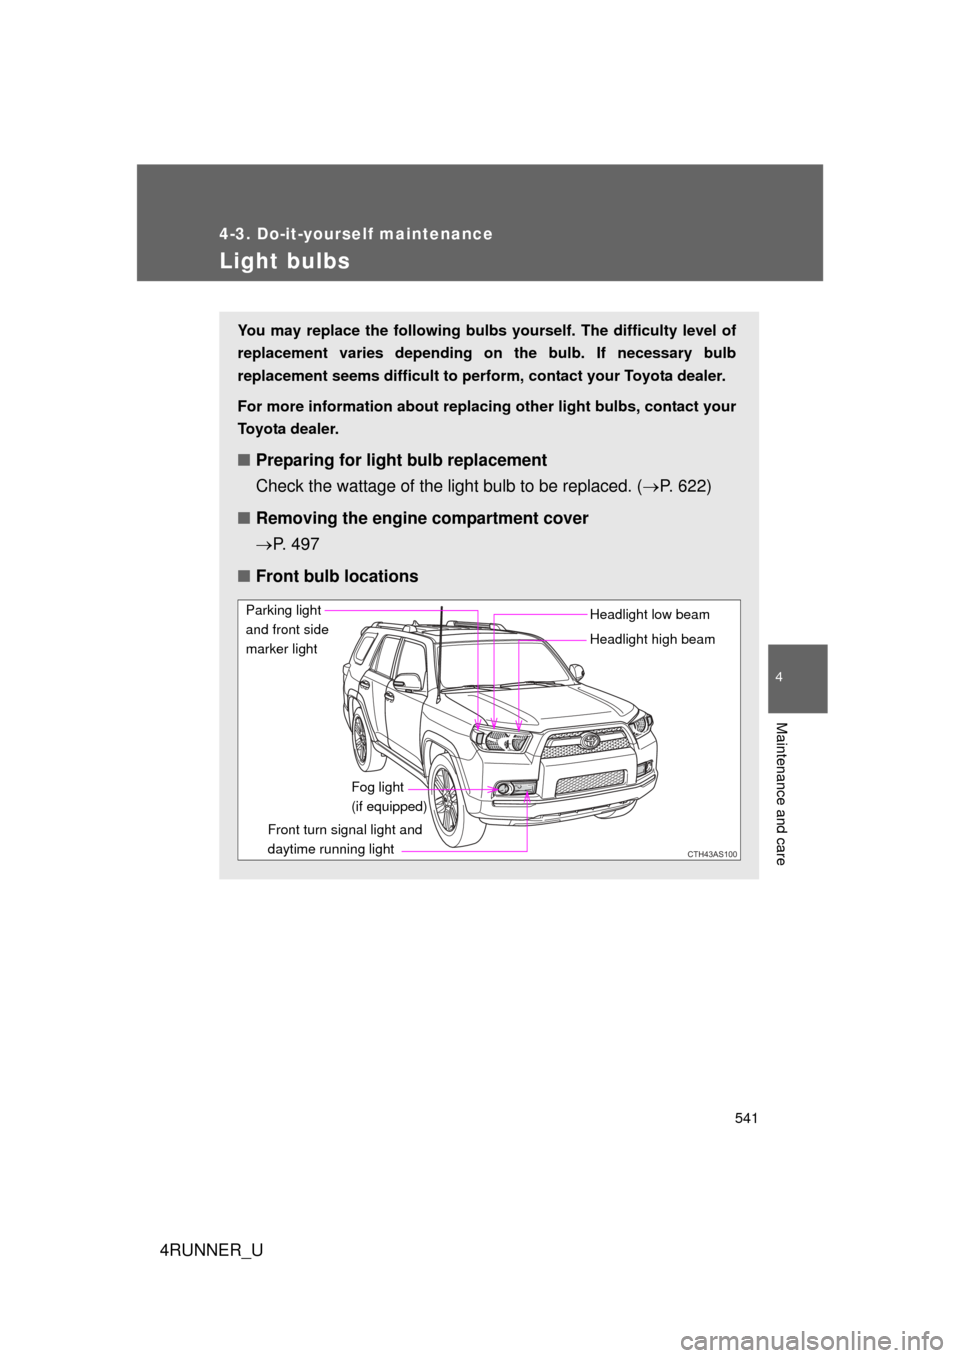 TOYOTA 4RUNNER 2010 N280 / 5.G Manual PDF 541
4-3. Do-it-yourself maintenance
4
Maintenance and care
4RUNNER_U
Light bulbs
You may replace the following bulbs yourself. The difficulty level of
replacement varies depending on the bulb. If nece